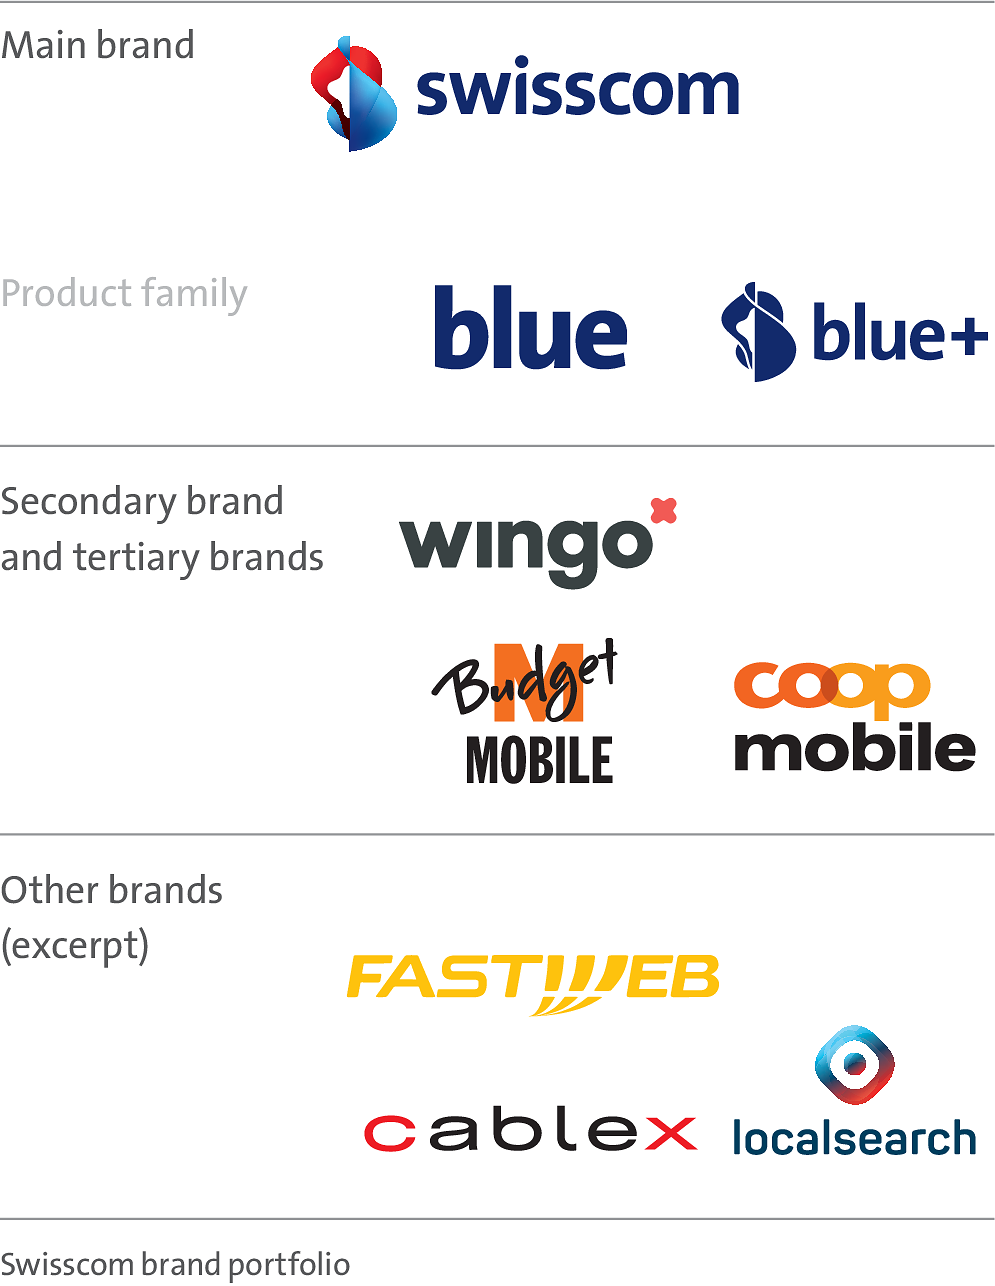 The graphic visualises the brand portfolio with the main brand Swisscom and its product family blue and blue+. Wingo, Budget Mobile and Coop Mobile are shown as the second- and third-party brands. Other brands include Fastweb, cablex and localsearch.